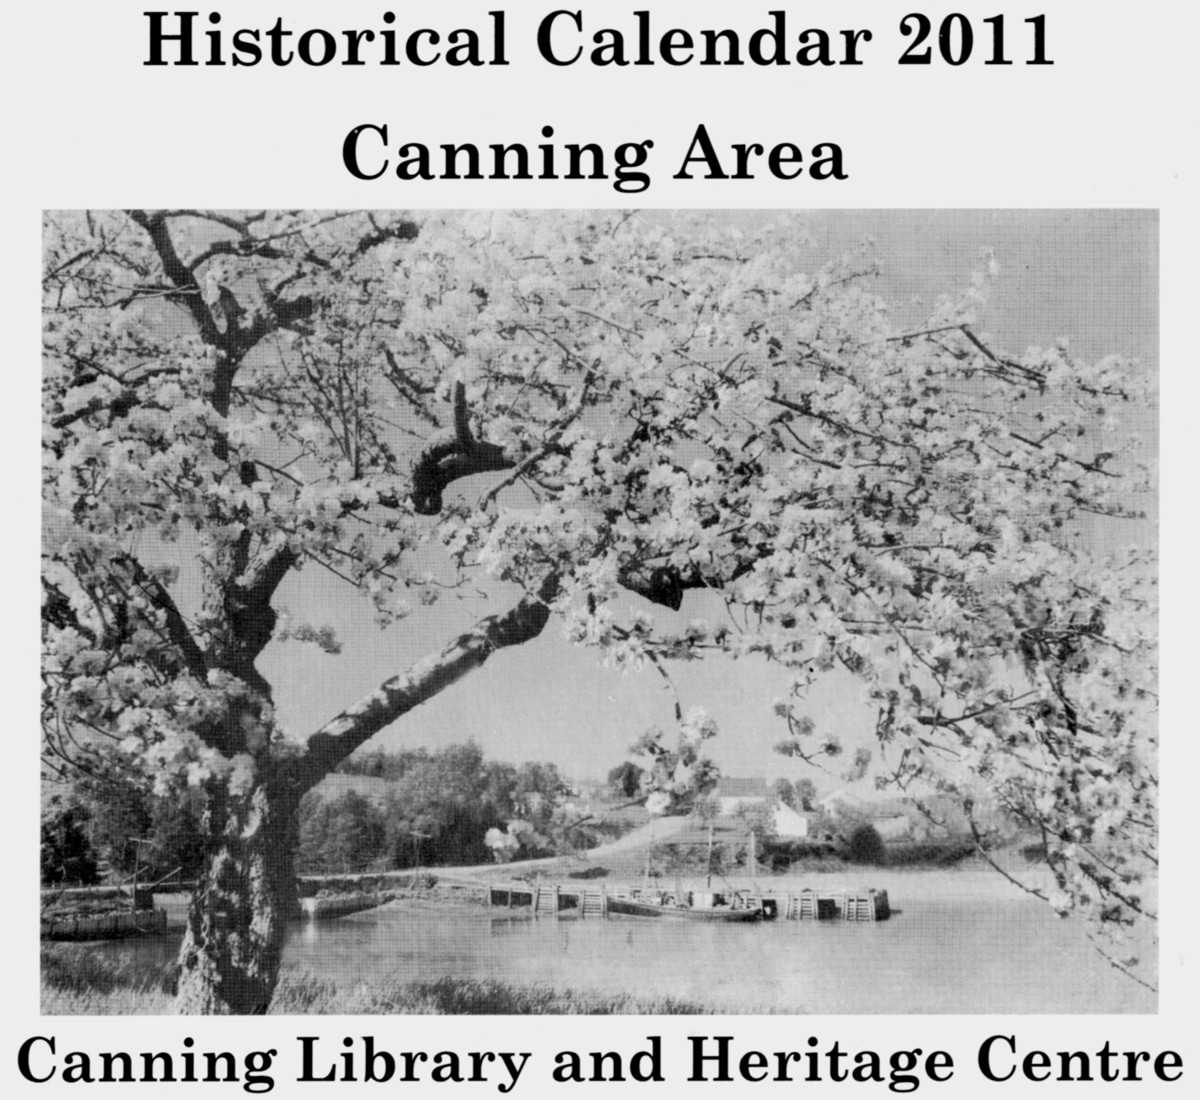 Canning Library and Heritage Center, Historical Calendar 2011